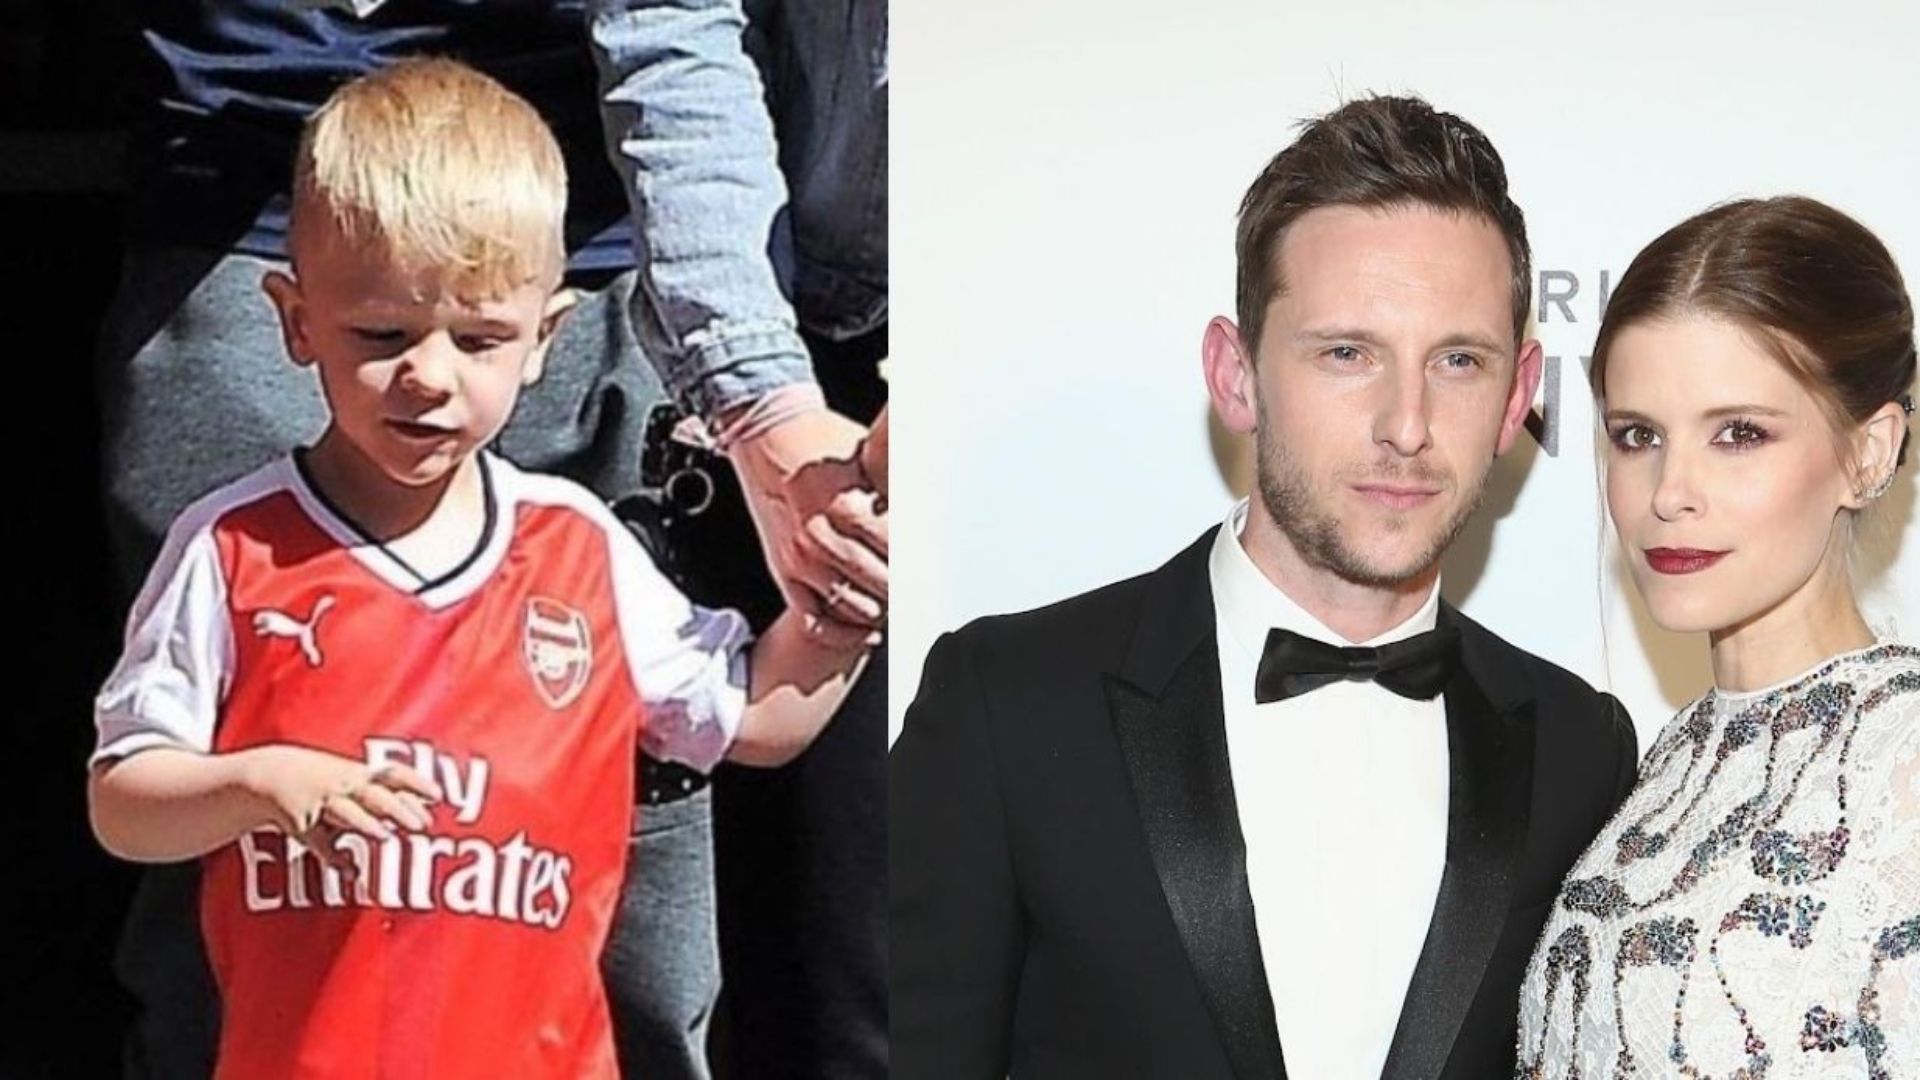 Jack Matfin Bell - An American Celebrity Kid Best Known As Jamie Bell And Evan's Son